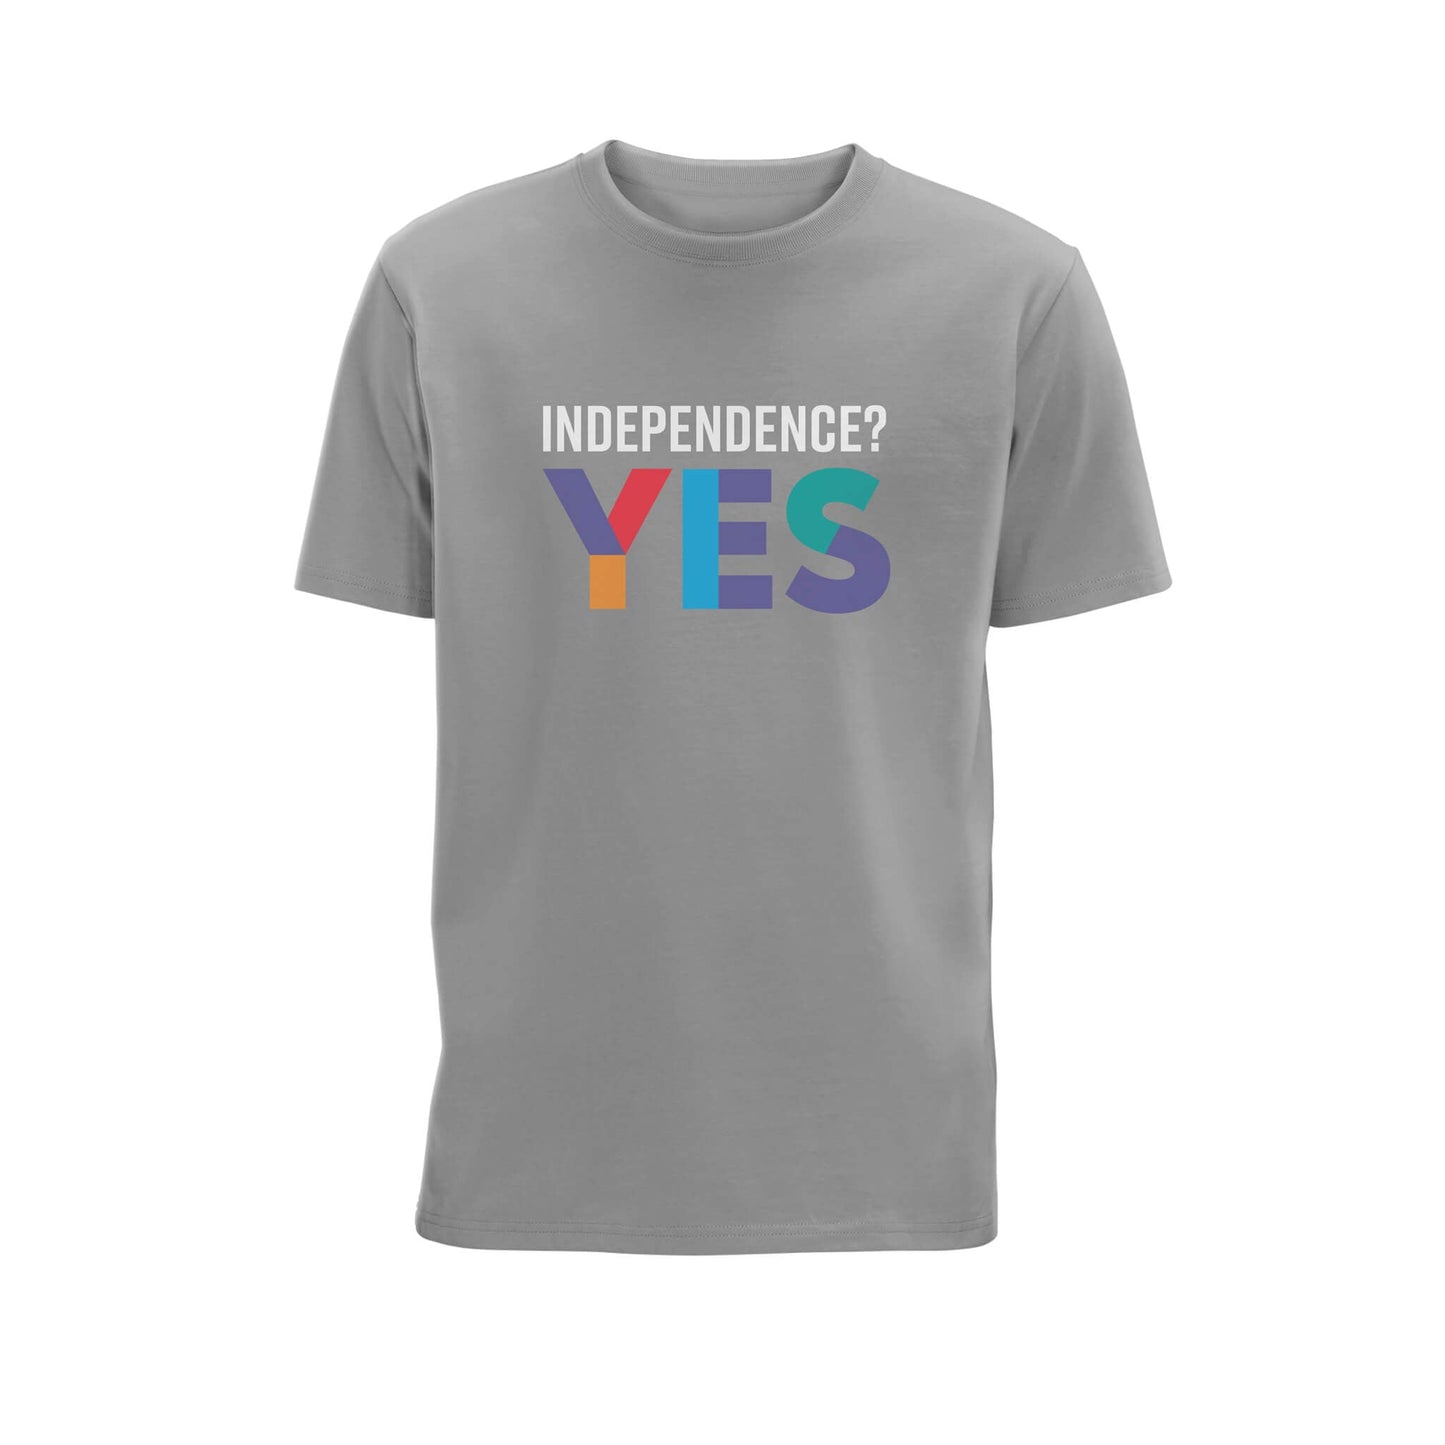 Independence? YES Organic Cotton T-Shirt - Grey Marl - SNP Store